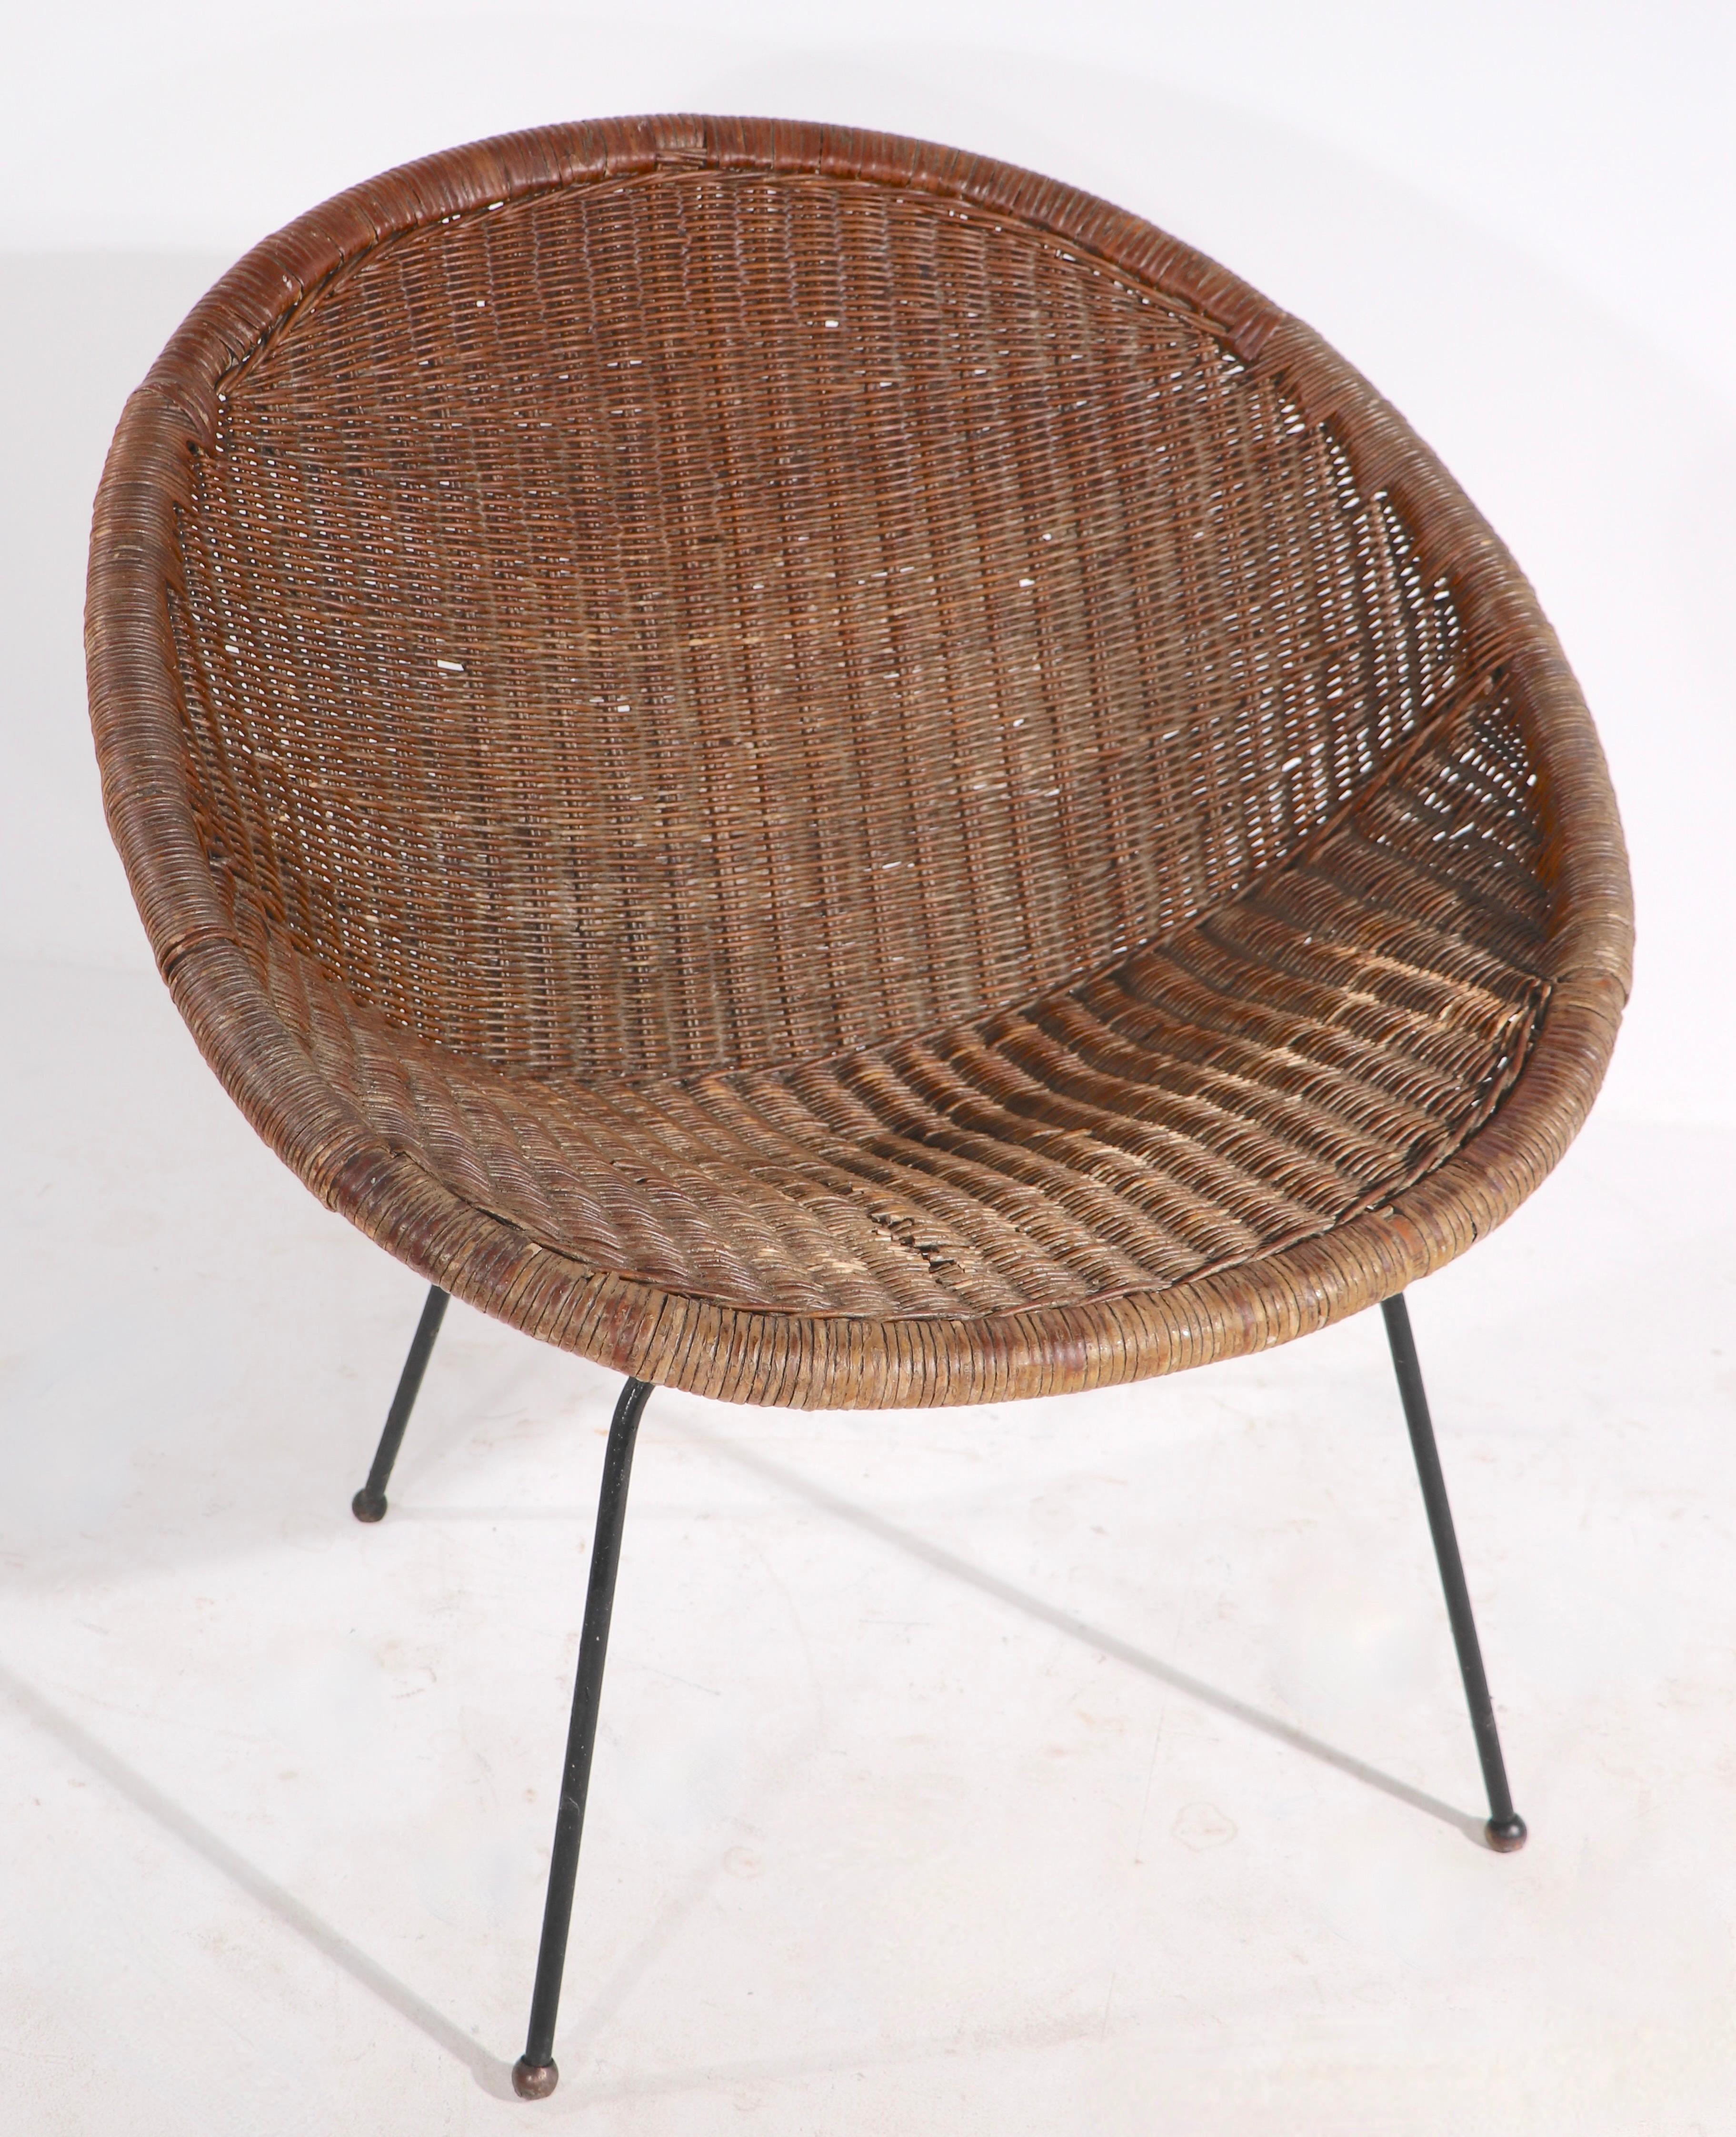 Pair of mid century woven wicker lounge chairs on wrought iron legs. Both chairs are in good, original condition, both show some wear, and minor loss to the wicker, one chair is missing one ball foot. Offered and priced as a pair.